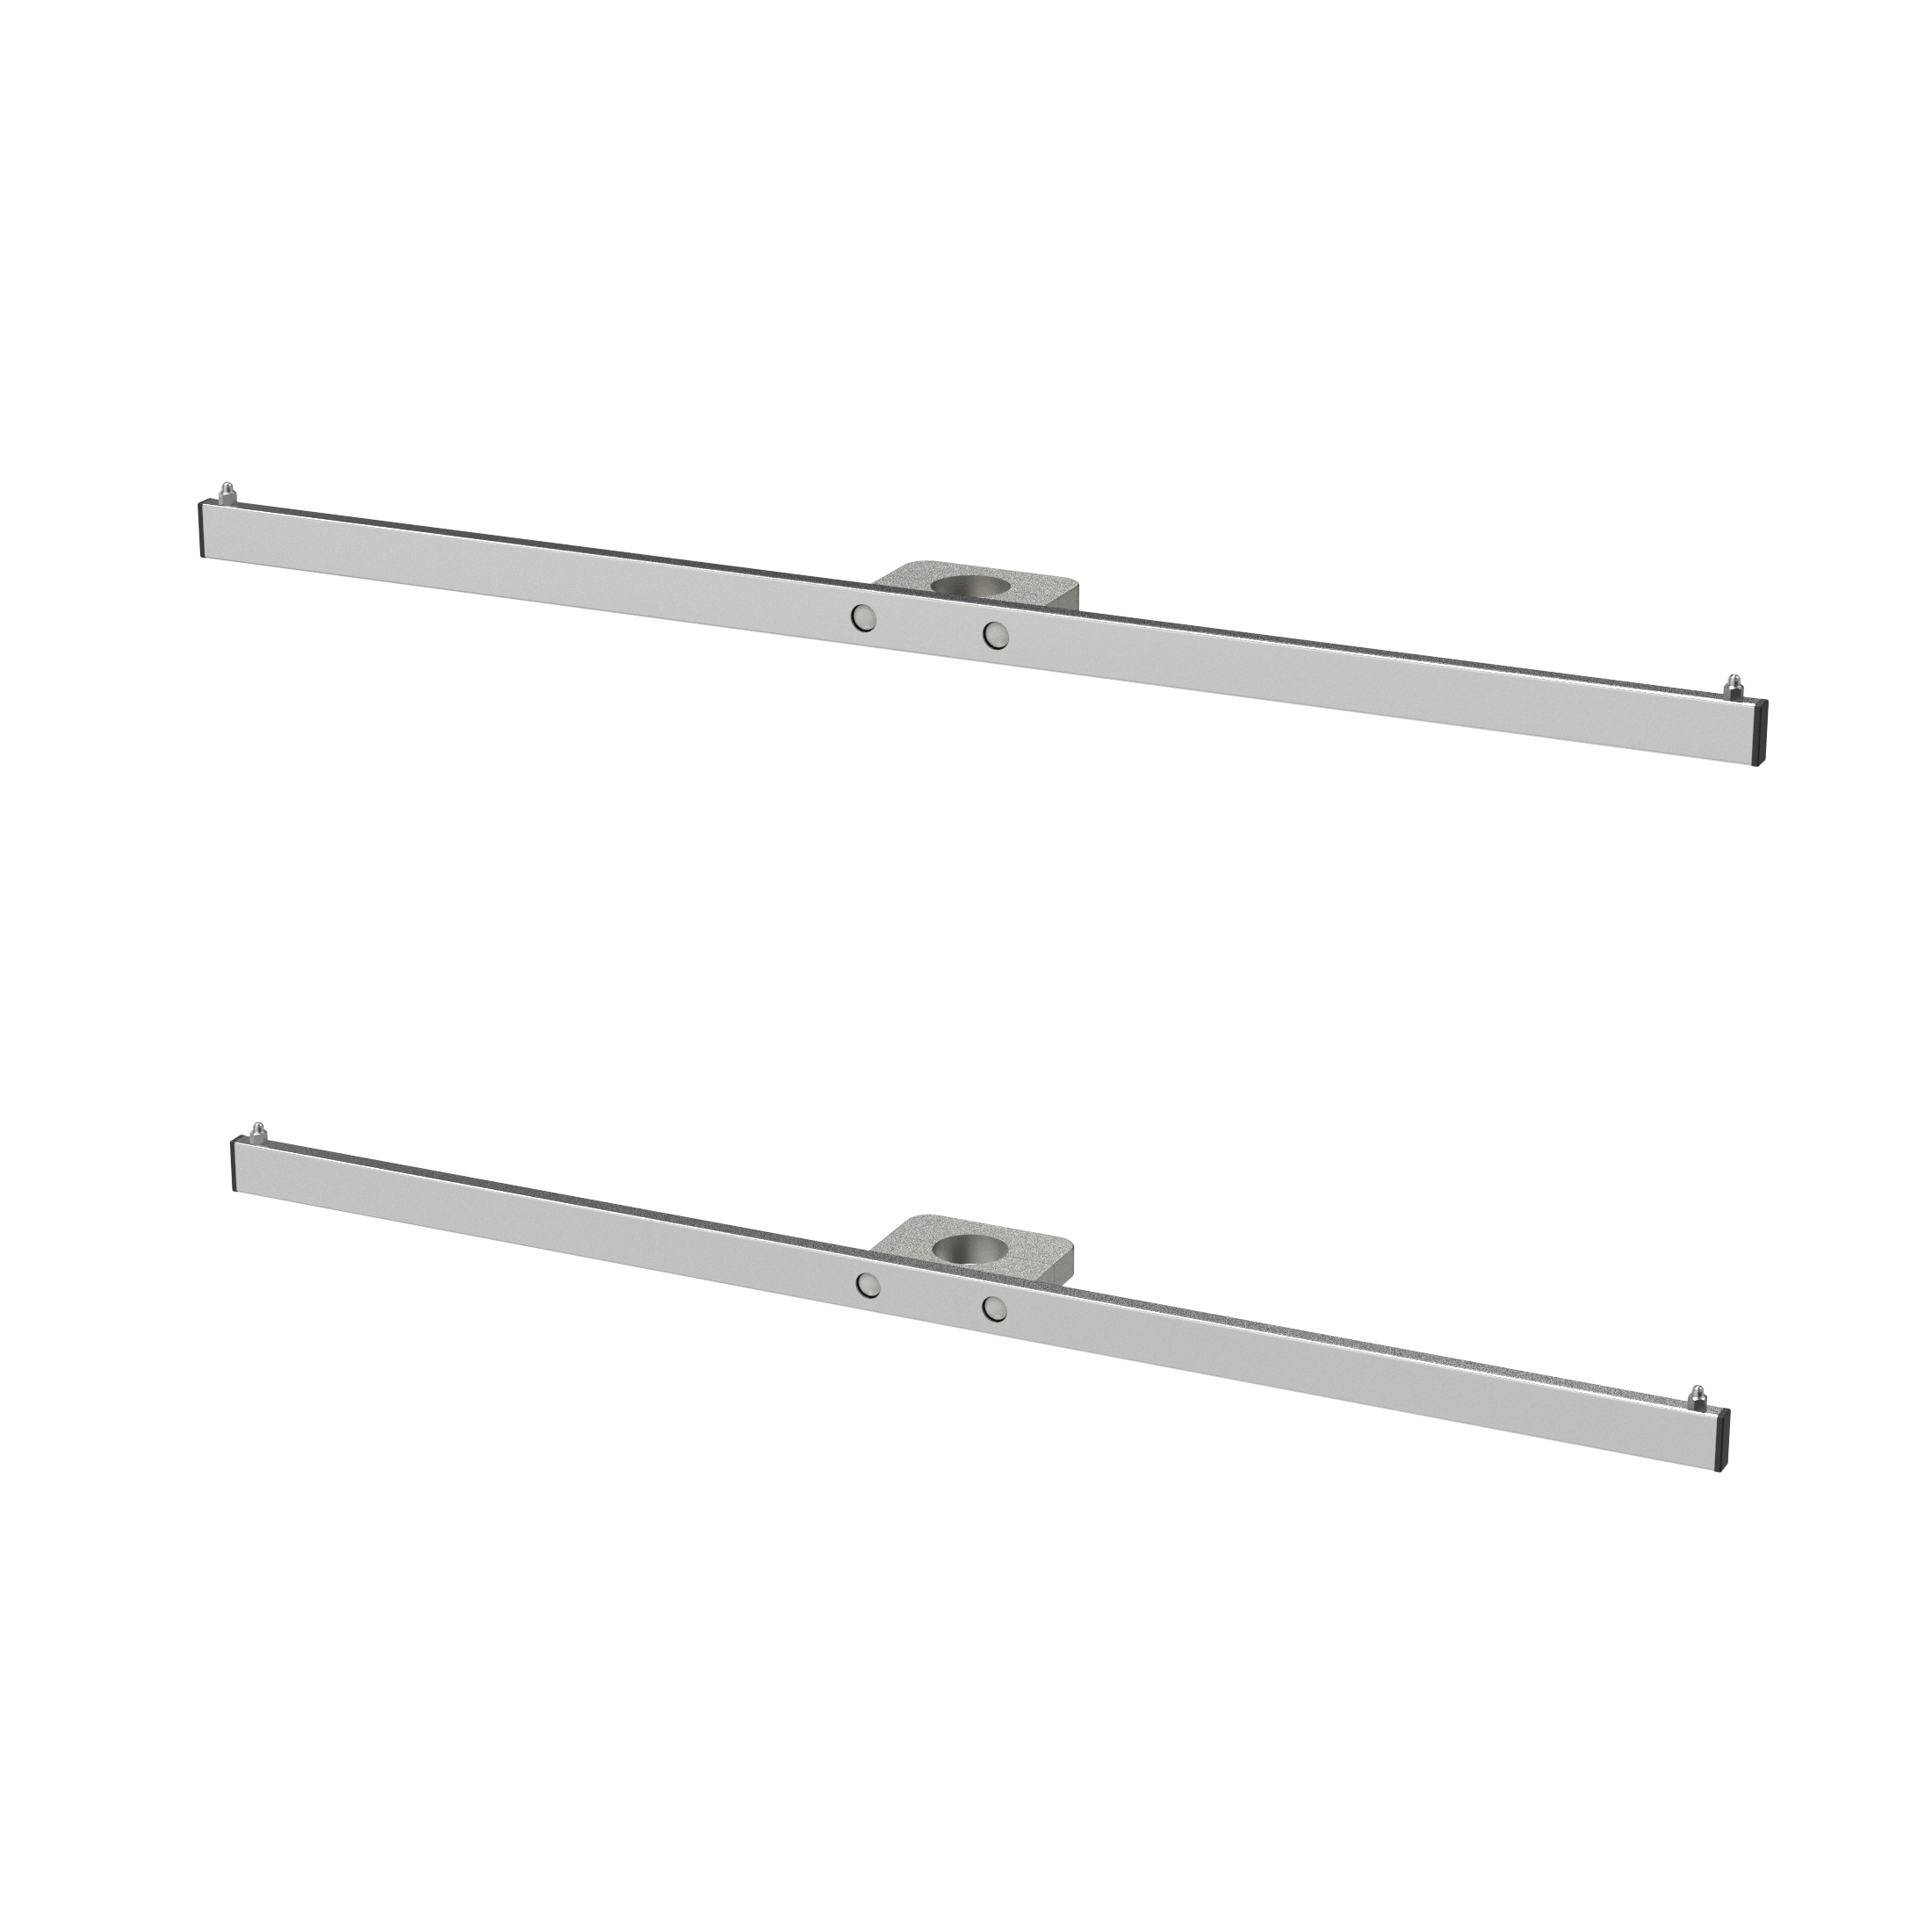 medical rails, long, double-sided